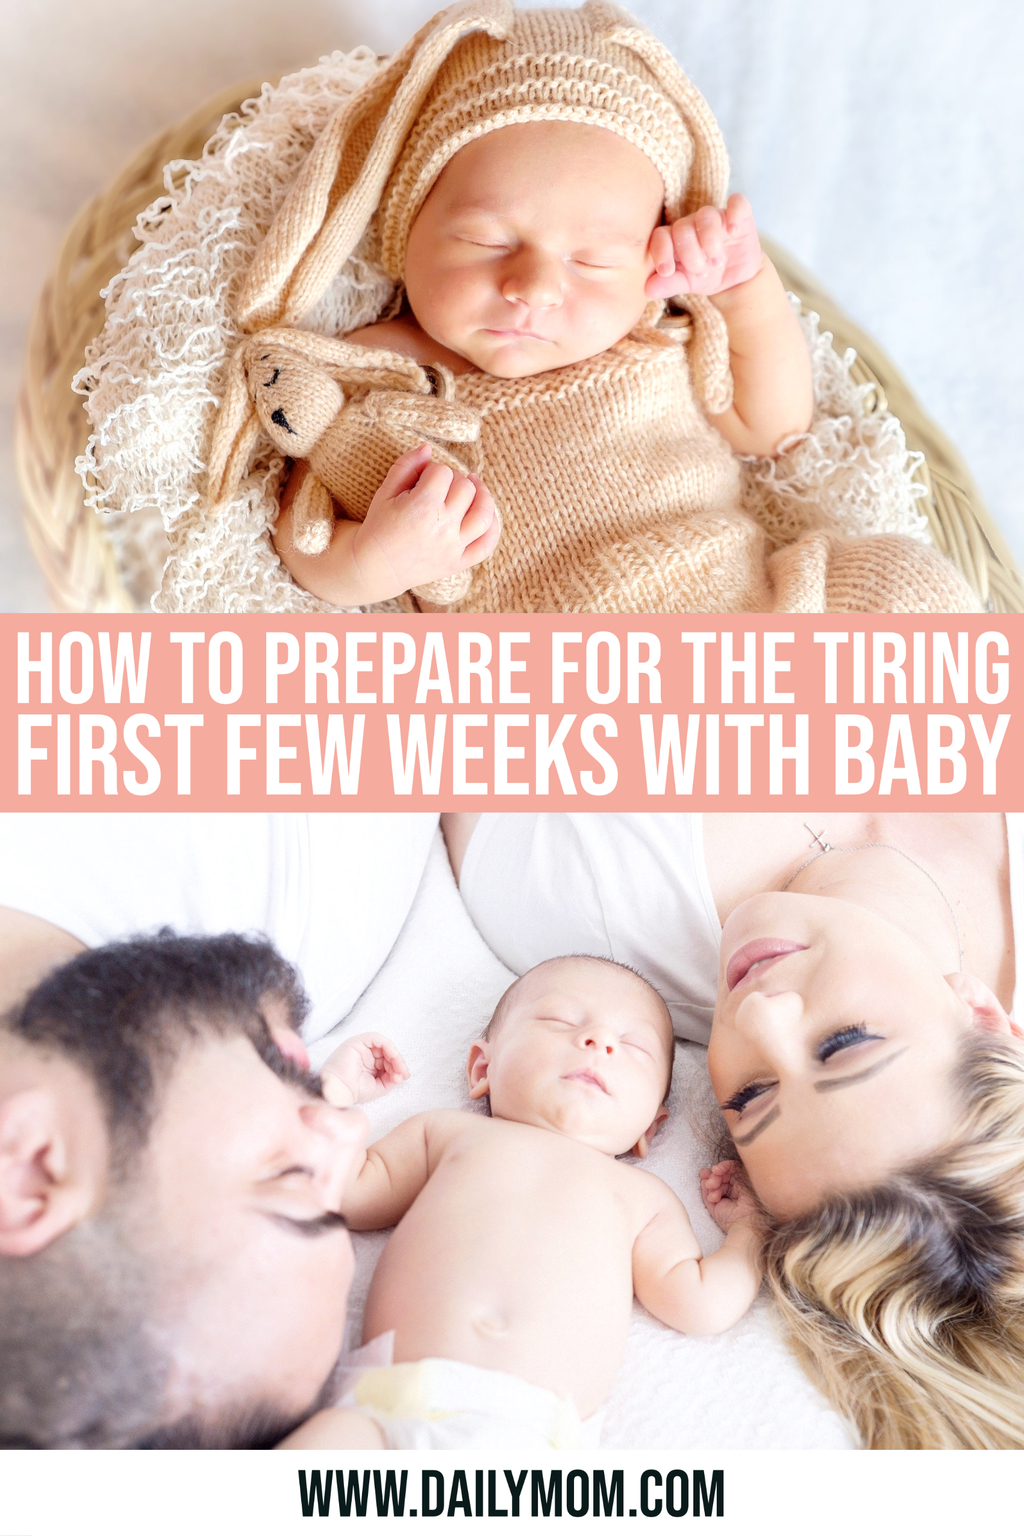 How To Prepare For The Tiring First Few Weeks With Baby 1